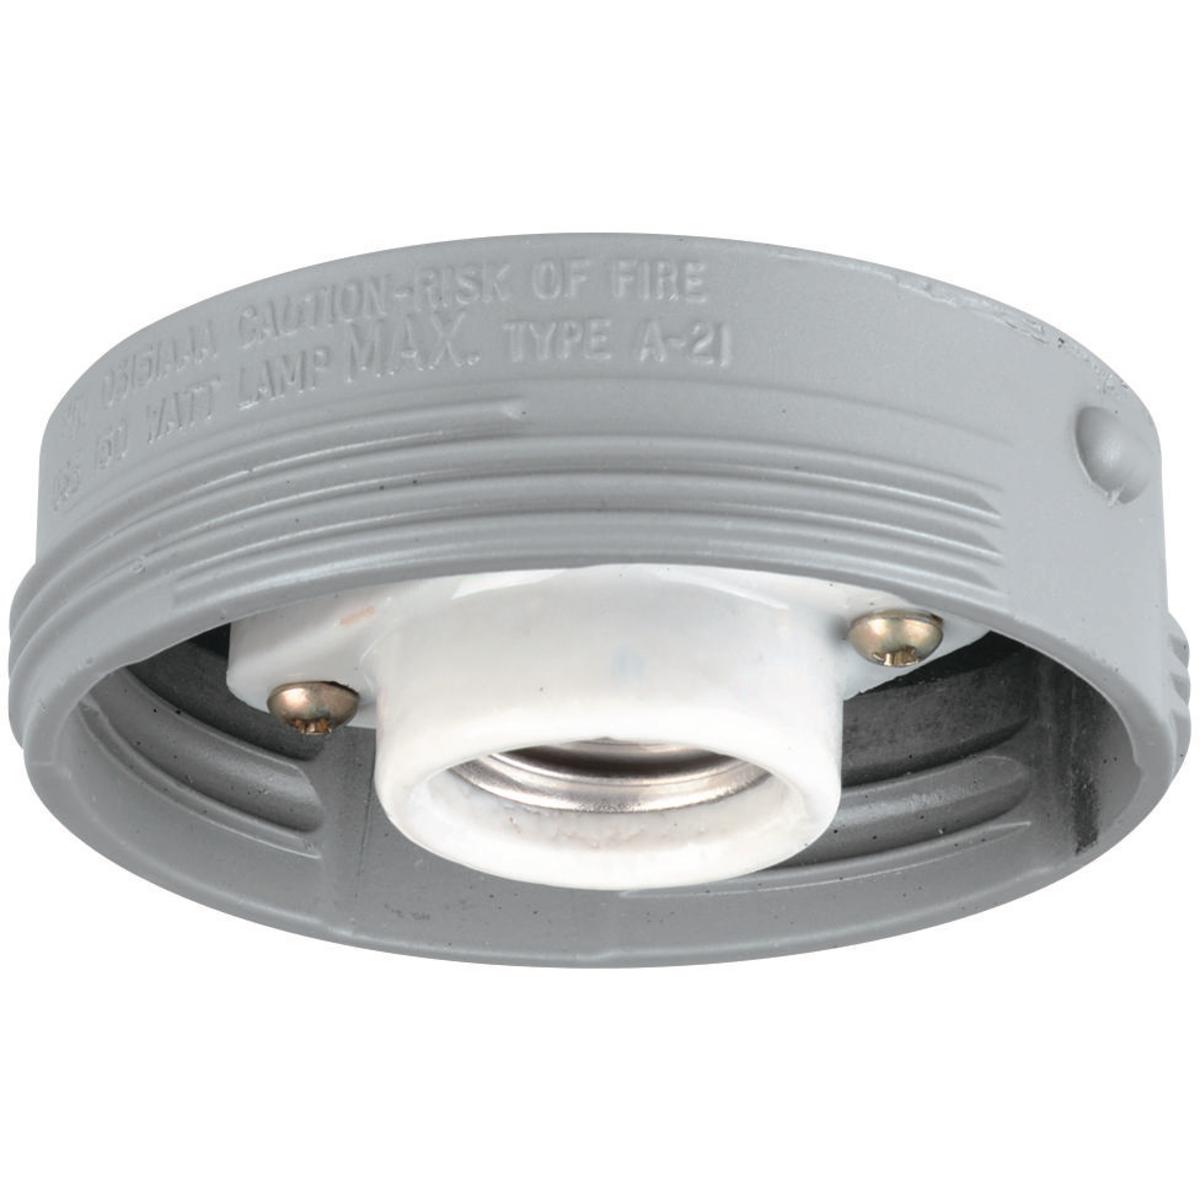 Hubbell VXFC-100 N34 VFC Series - Aluminum 100 Watt Incandescent Light Fixture Body - NEMA 3,4 - Class I Division 2 - 150W Max  ; Electrostatically applied epoxy/polyester finish ; Modular design ; Hubs are threaded for attachment to conduit ; Set screws in pendant fixture ; 